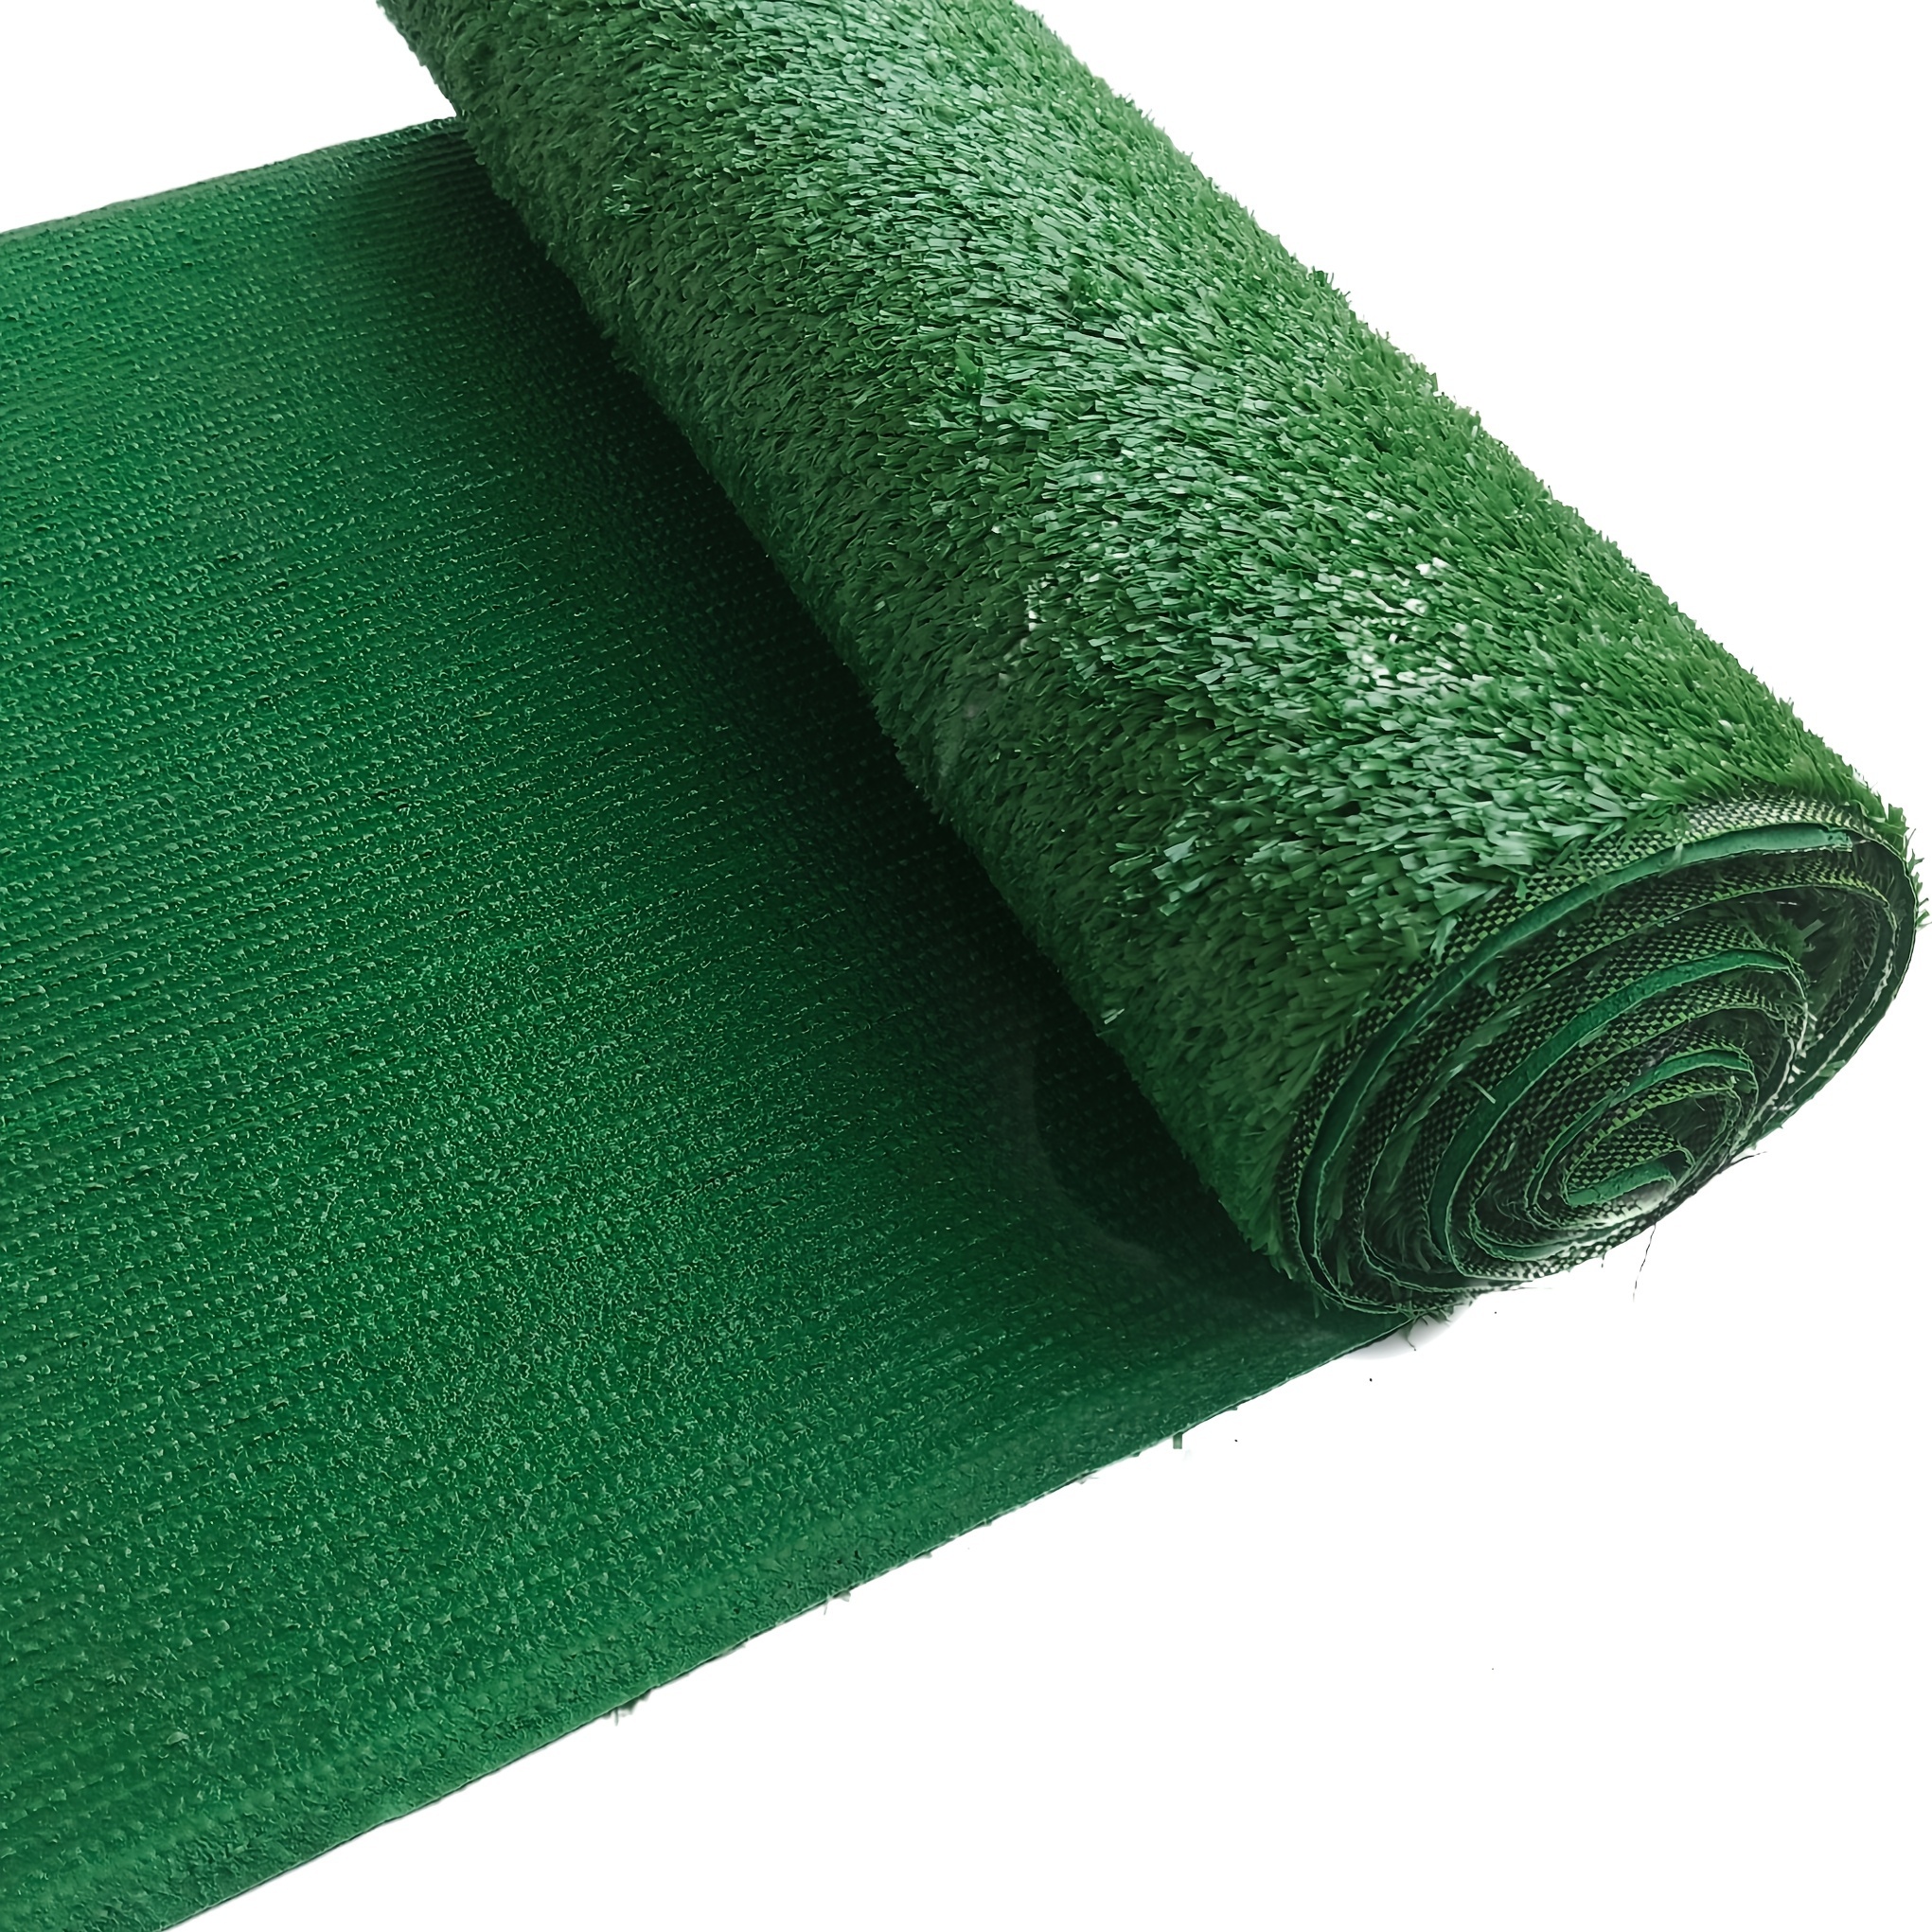 

Anti-aging With Dual-layer Backing, Plastic Synthetic Grass Mat, 10mm Blade Height – Indoor/outdoor Green Carpet Runner